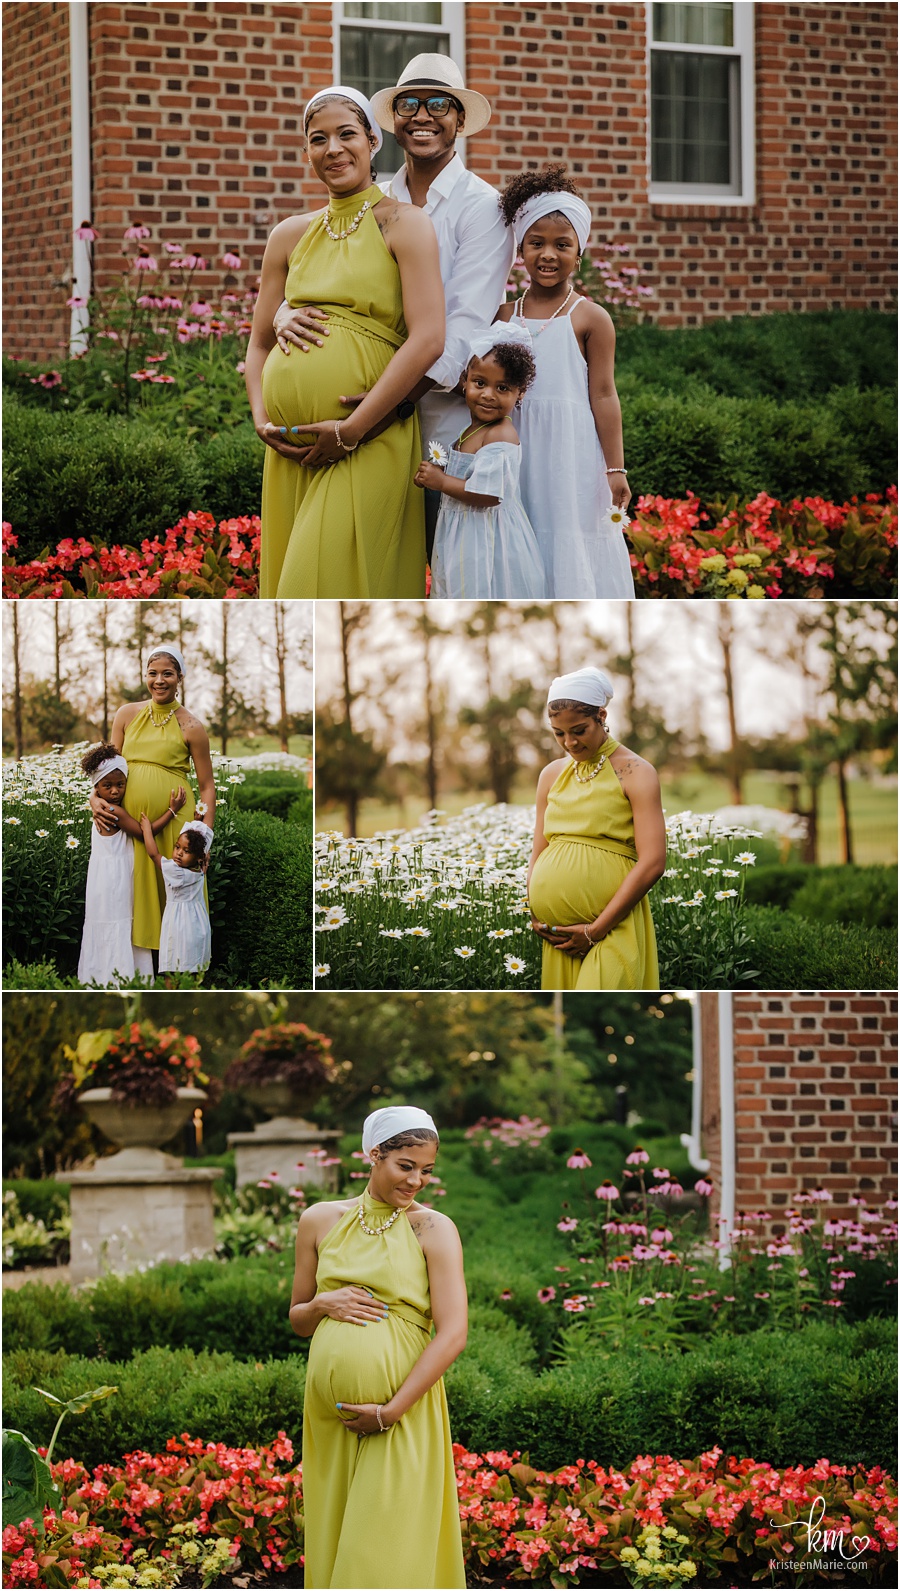 beautiful family for maternity photography session - Indianapolis, IN